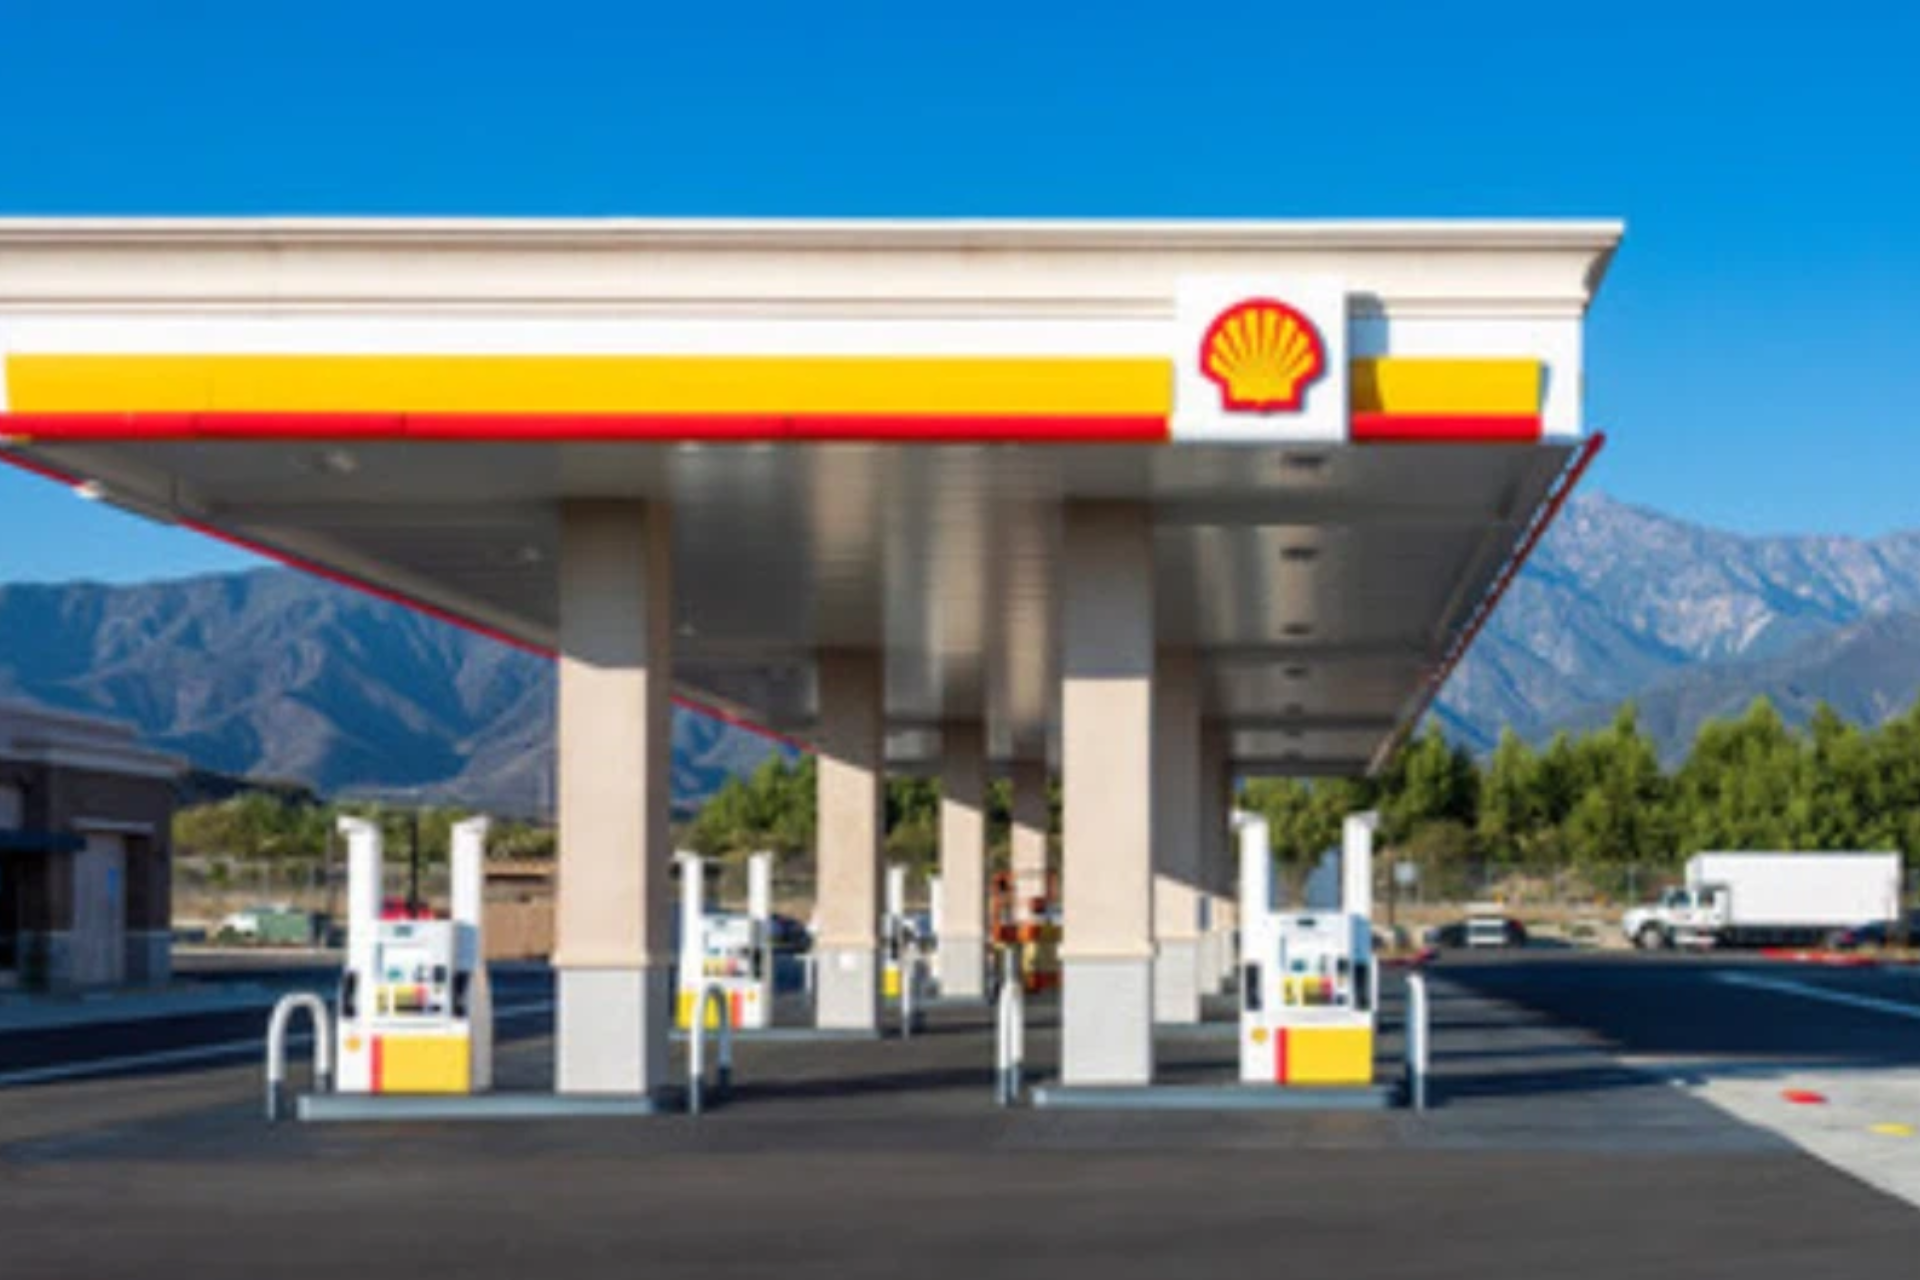 Shell leaving south africa